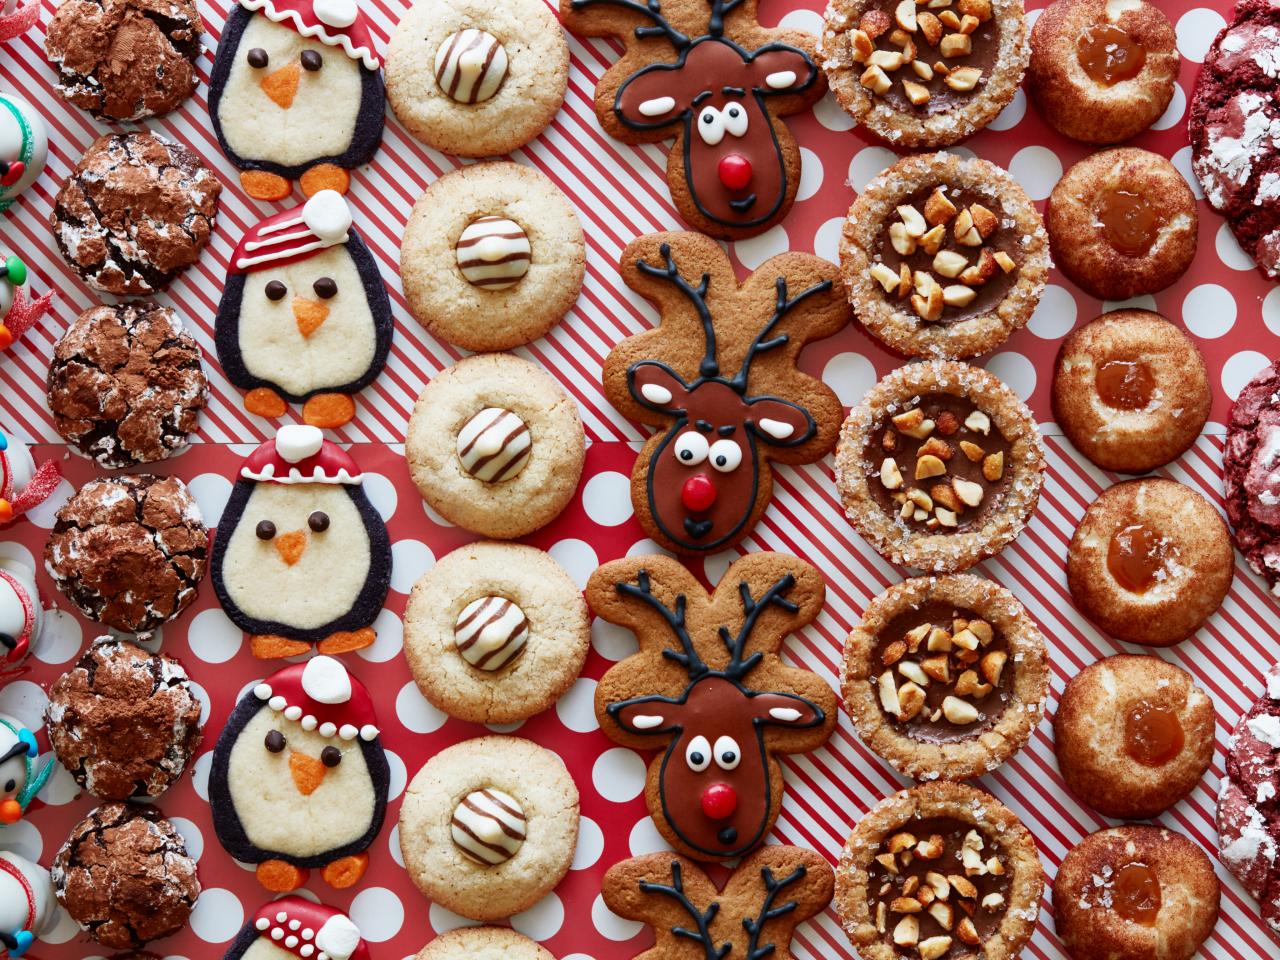 Christmas Cookie Recipes 2017 Food Network FN Dish BehindtheScenes, Food Trends, and